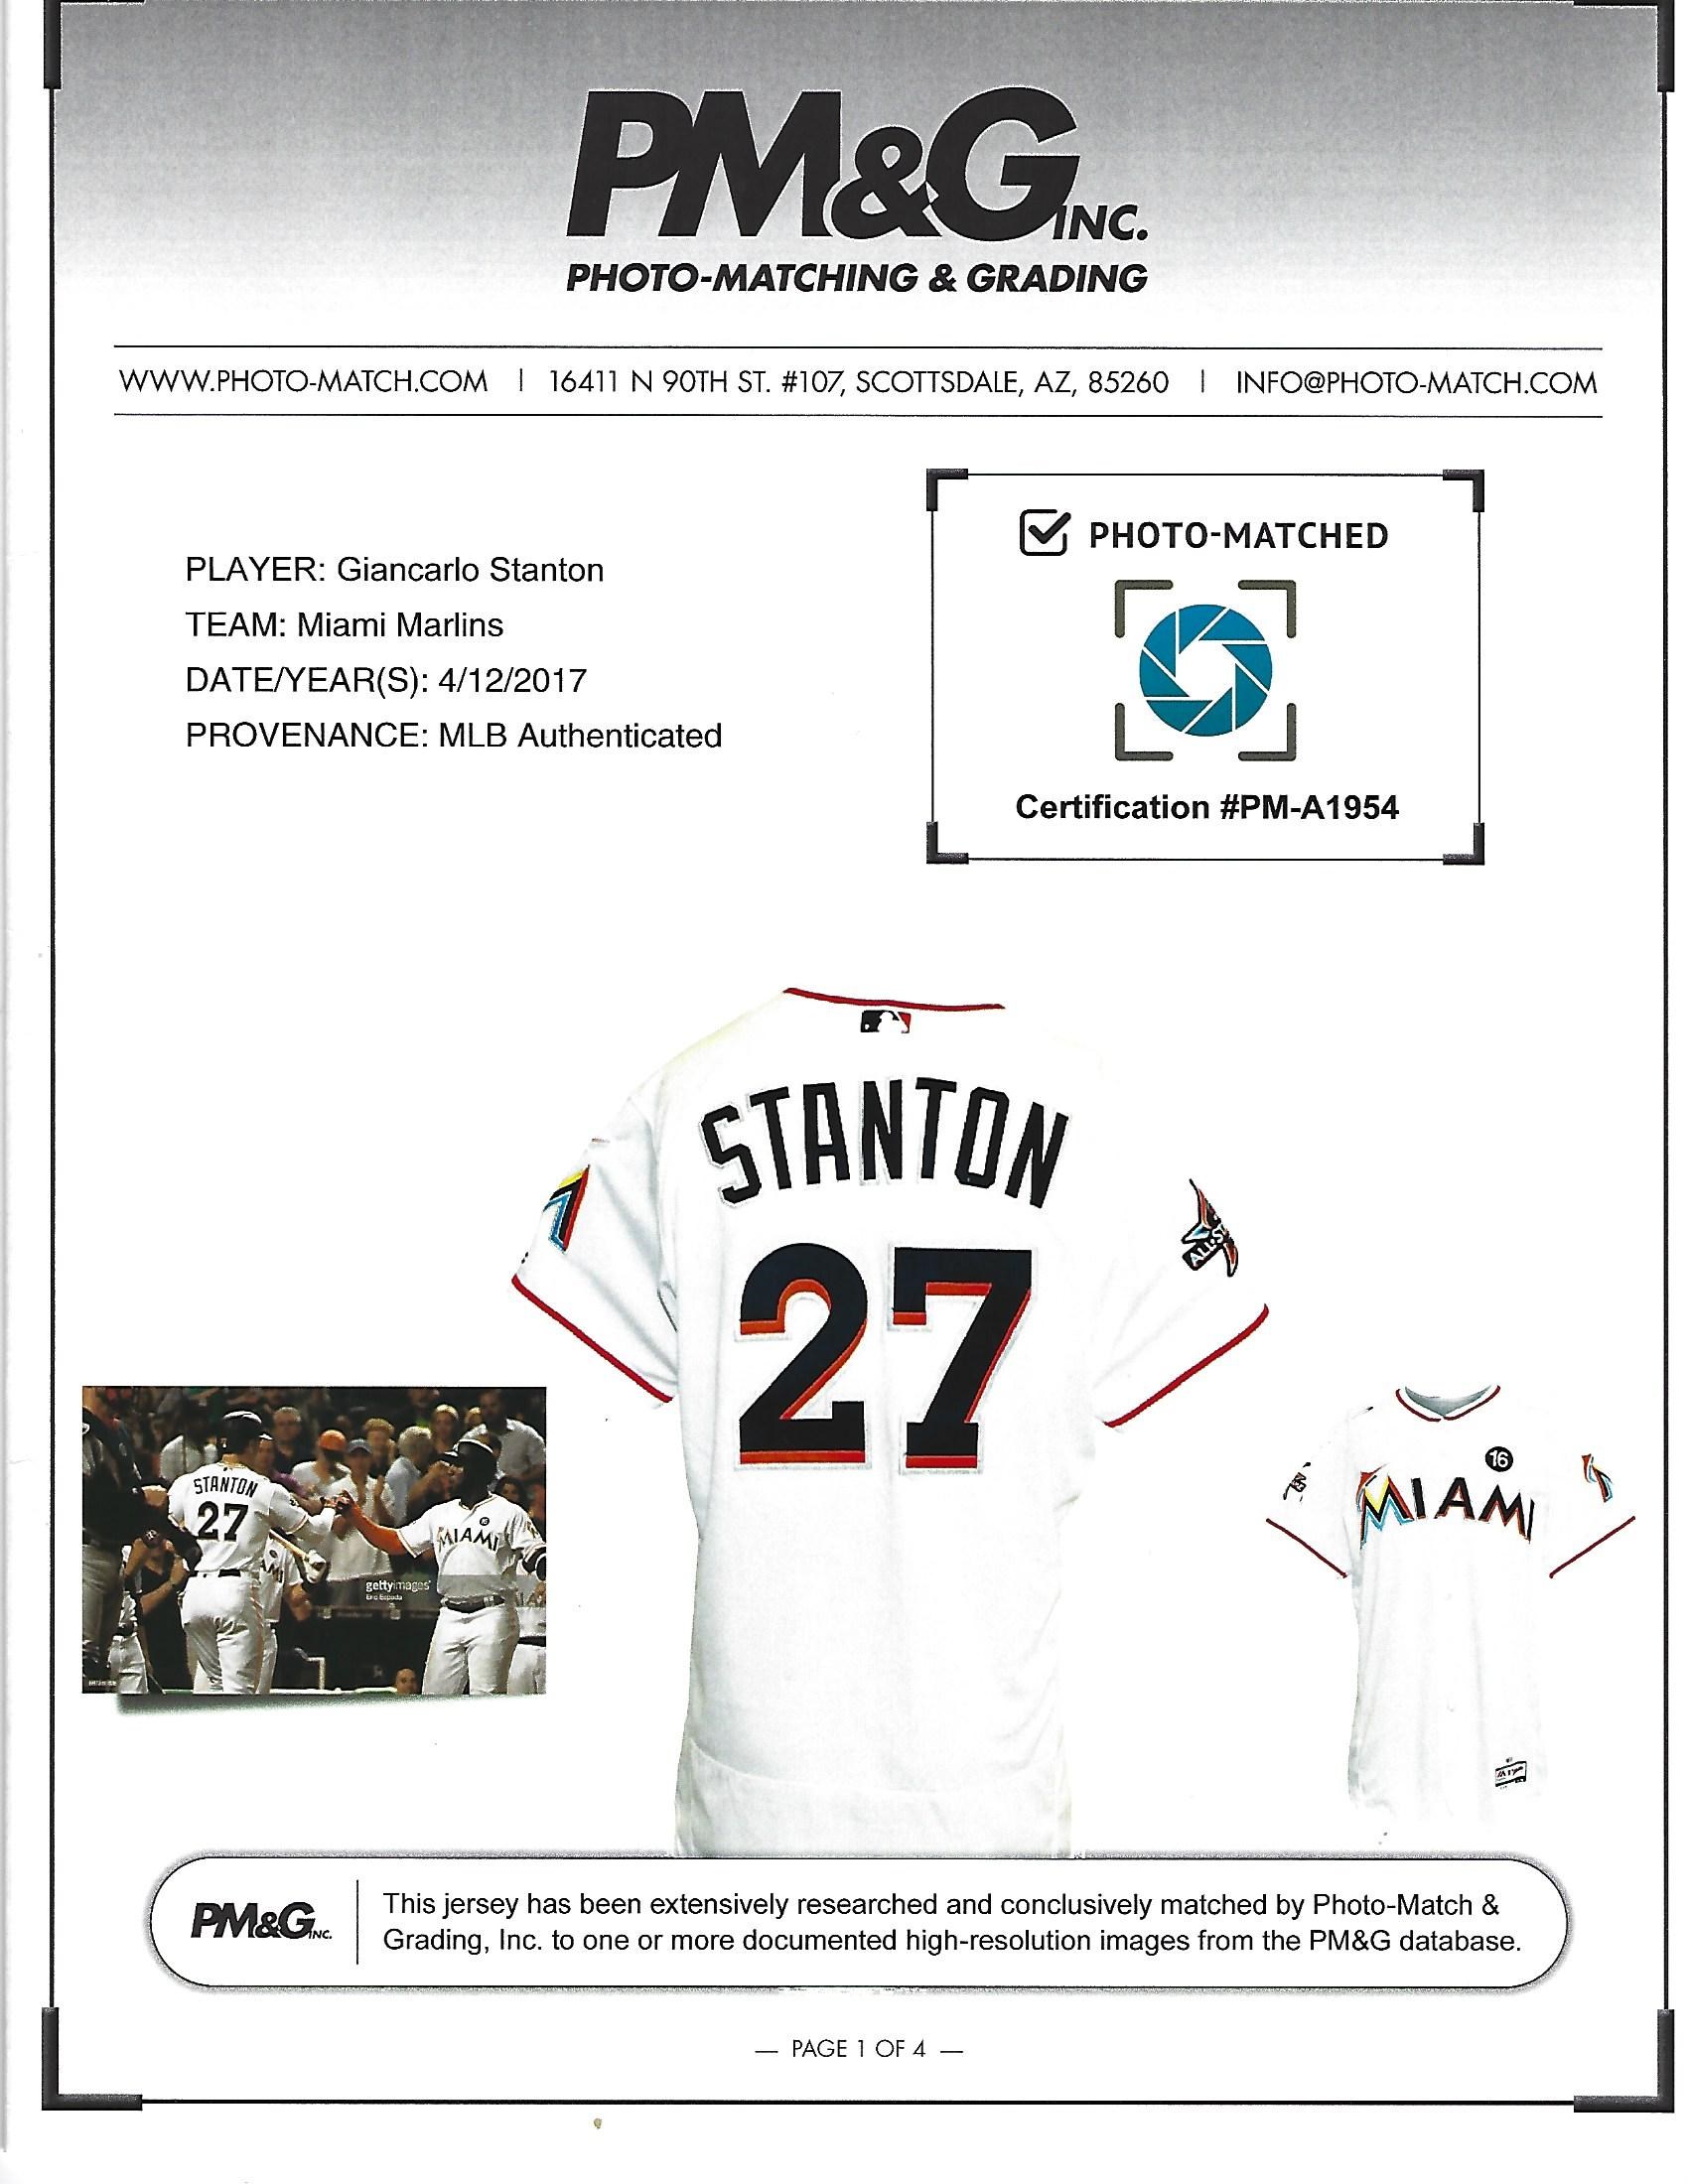 2015 Giancarlo Stanton Miami Marlins Game Used Home Jersey MEARS